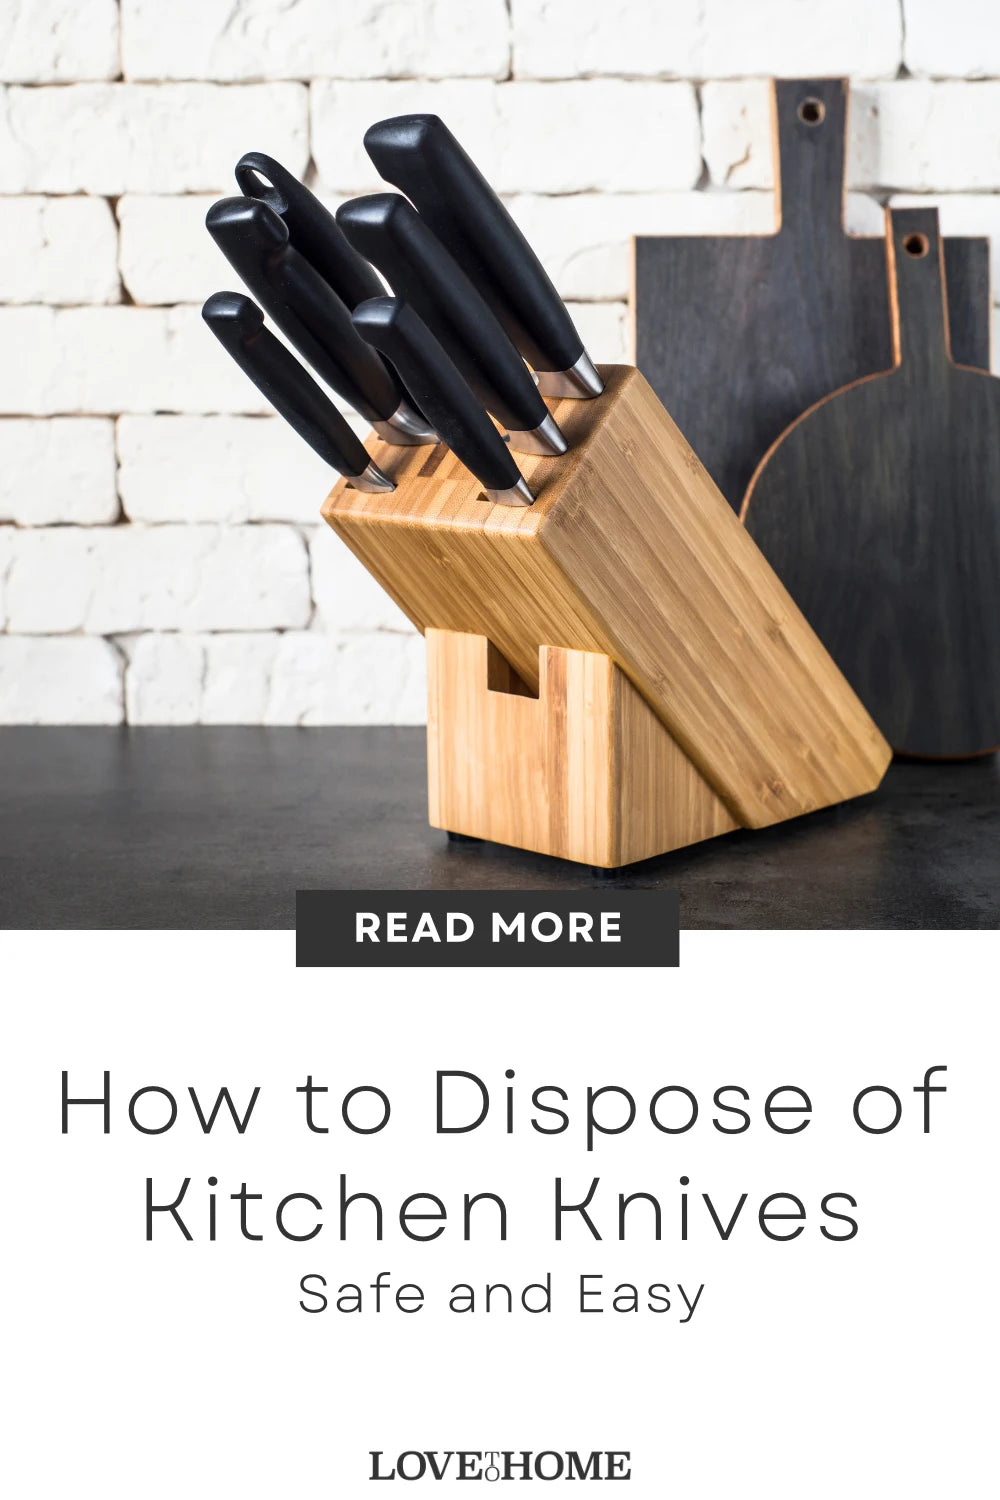 How to Safely Dispose of Kitchen Knives